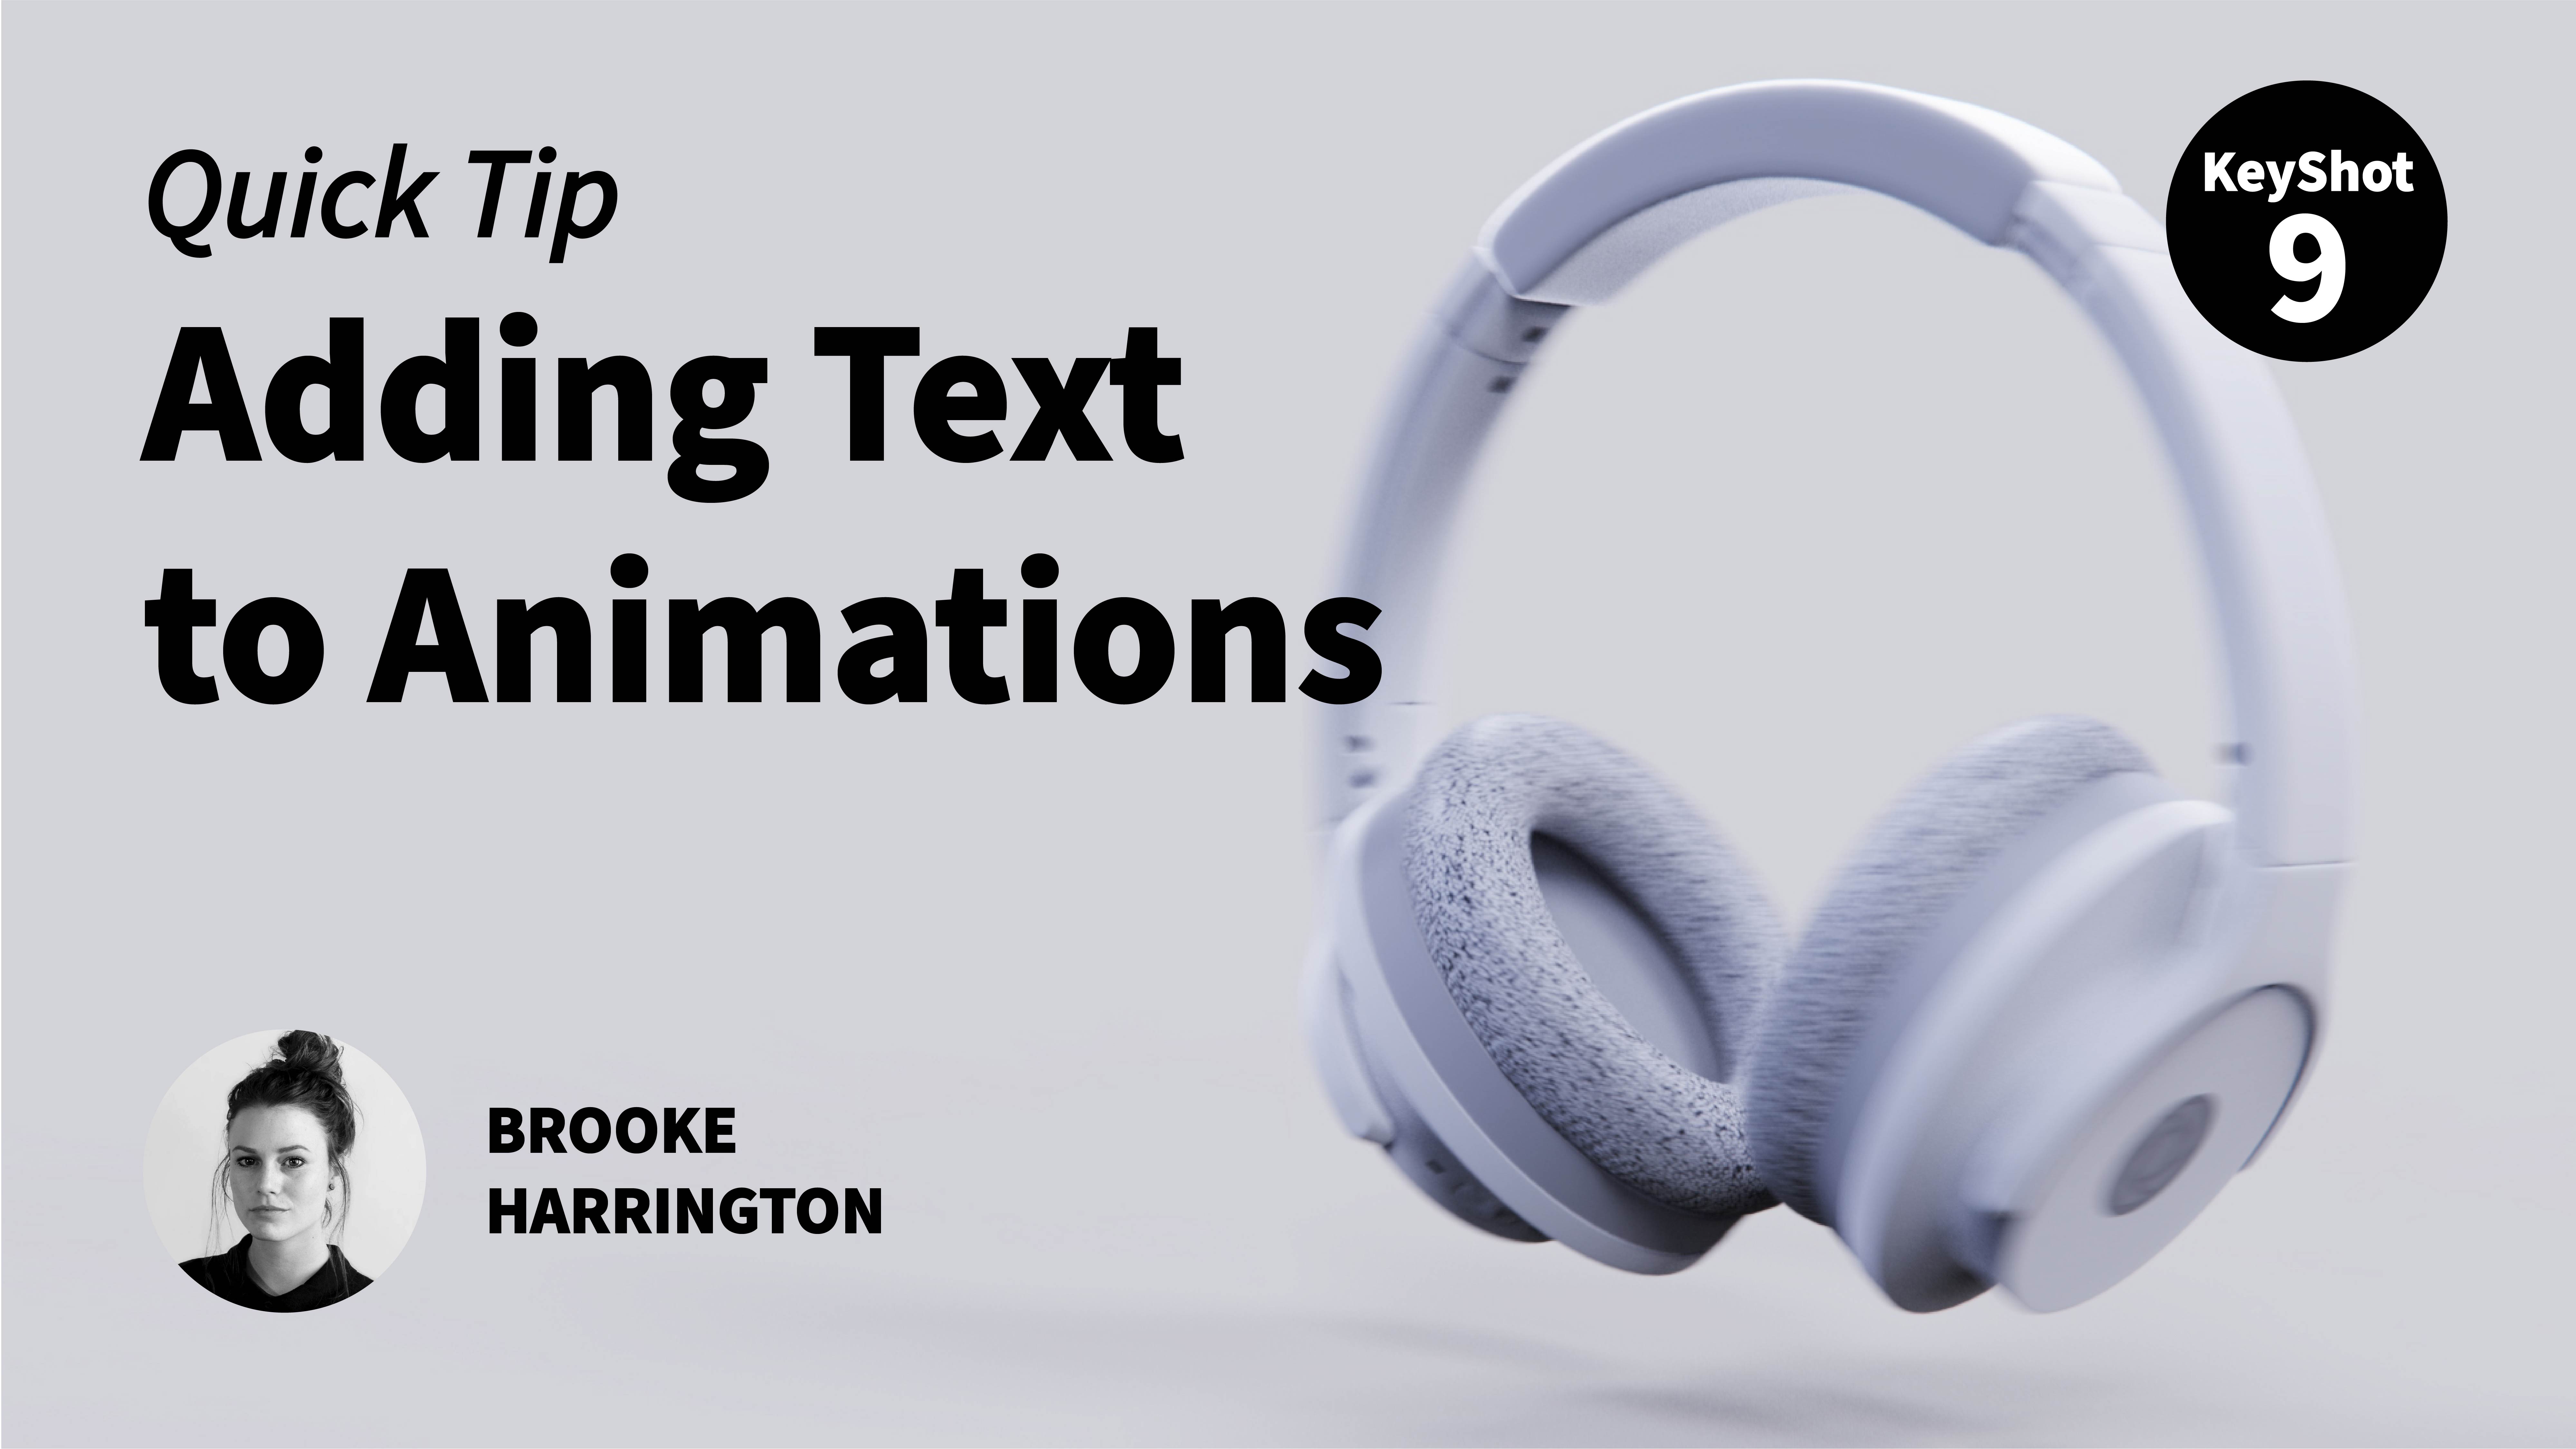 Quick Tip 115: How to Add Text to KeyShot Animations